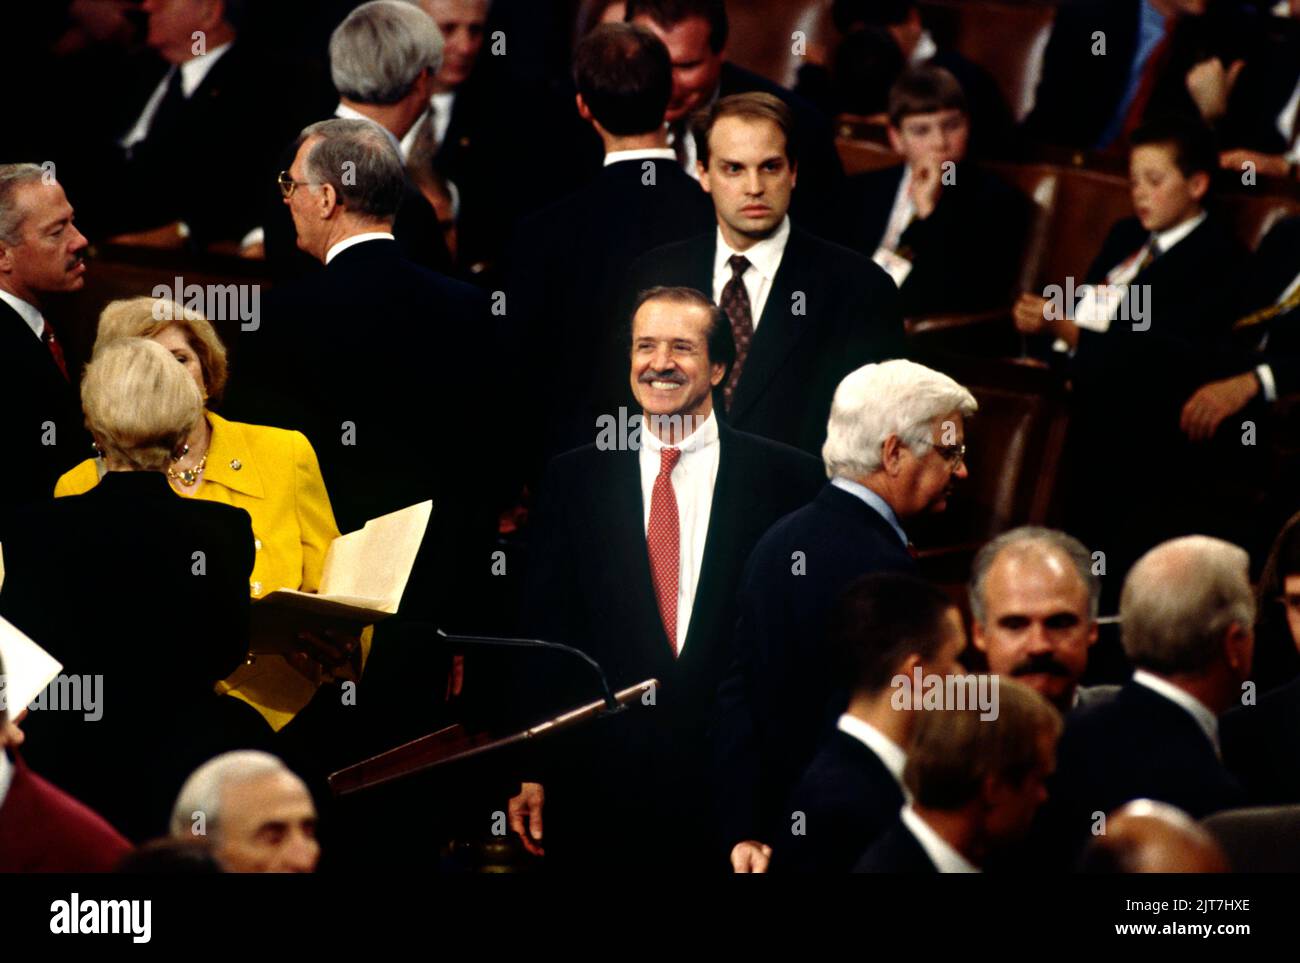 Former pop star U.S Rep. Sonny Bono, center, smiles as he takes his place in the 105th Congress on the floor of the U.S Congress on Capitol Hill, January 7, 1997 in Washington, D.C. Stock Photo